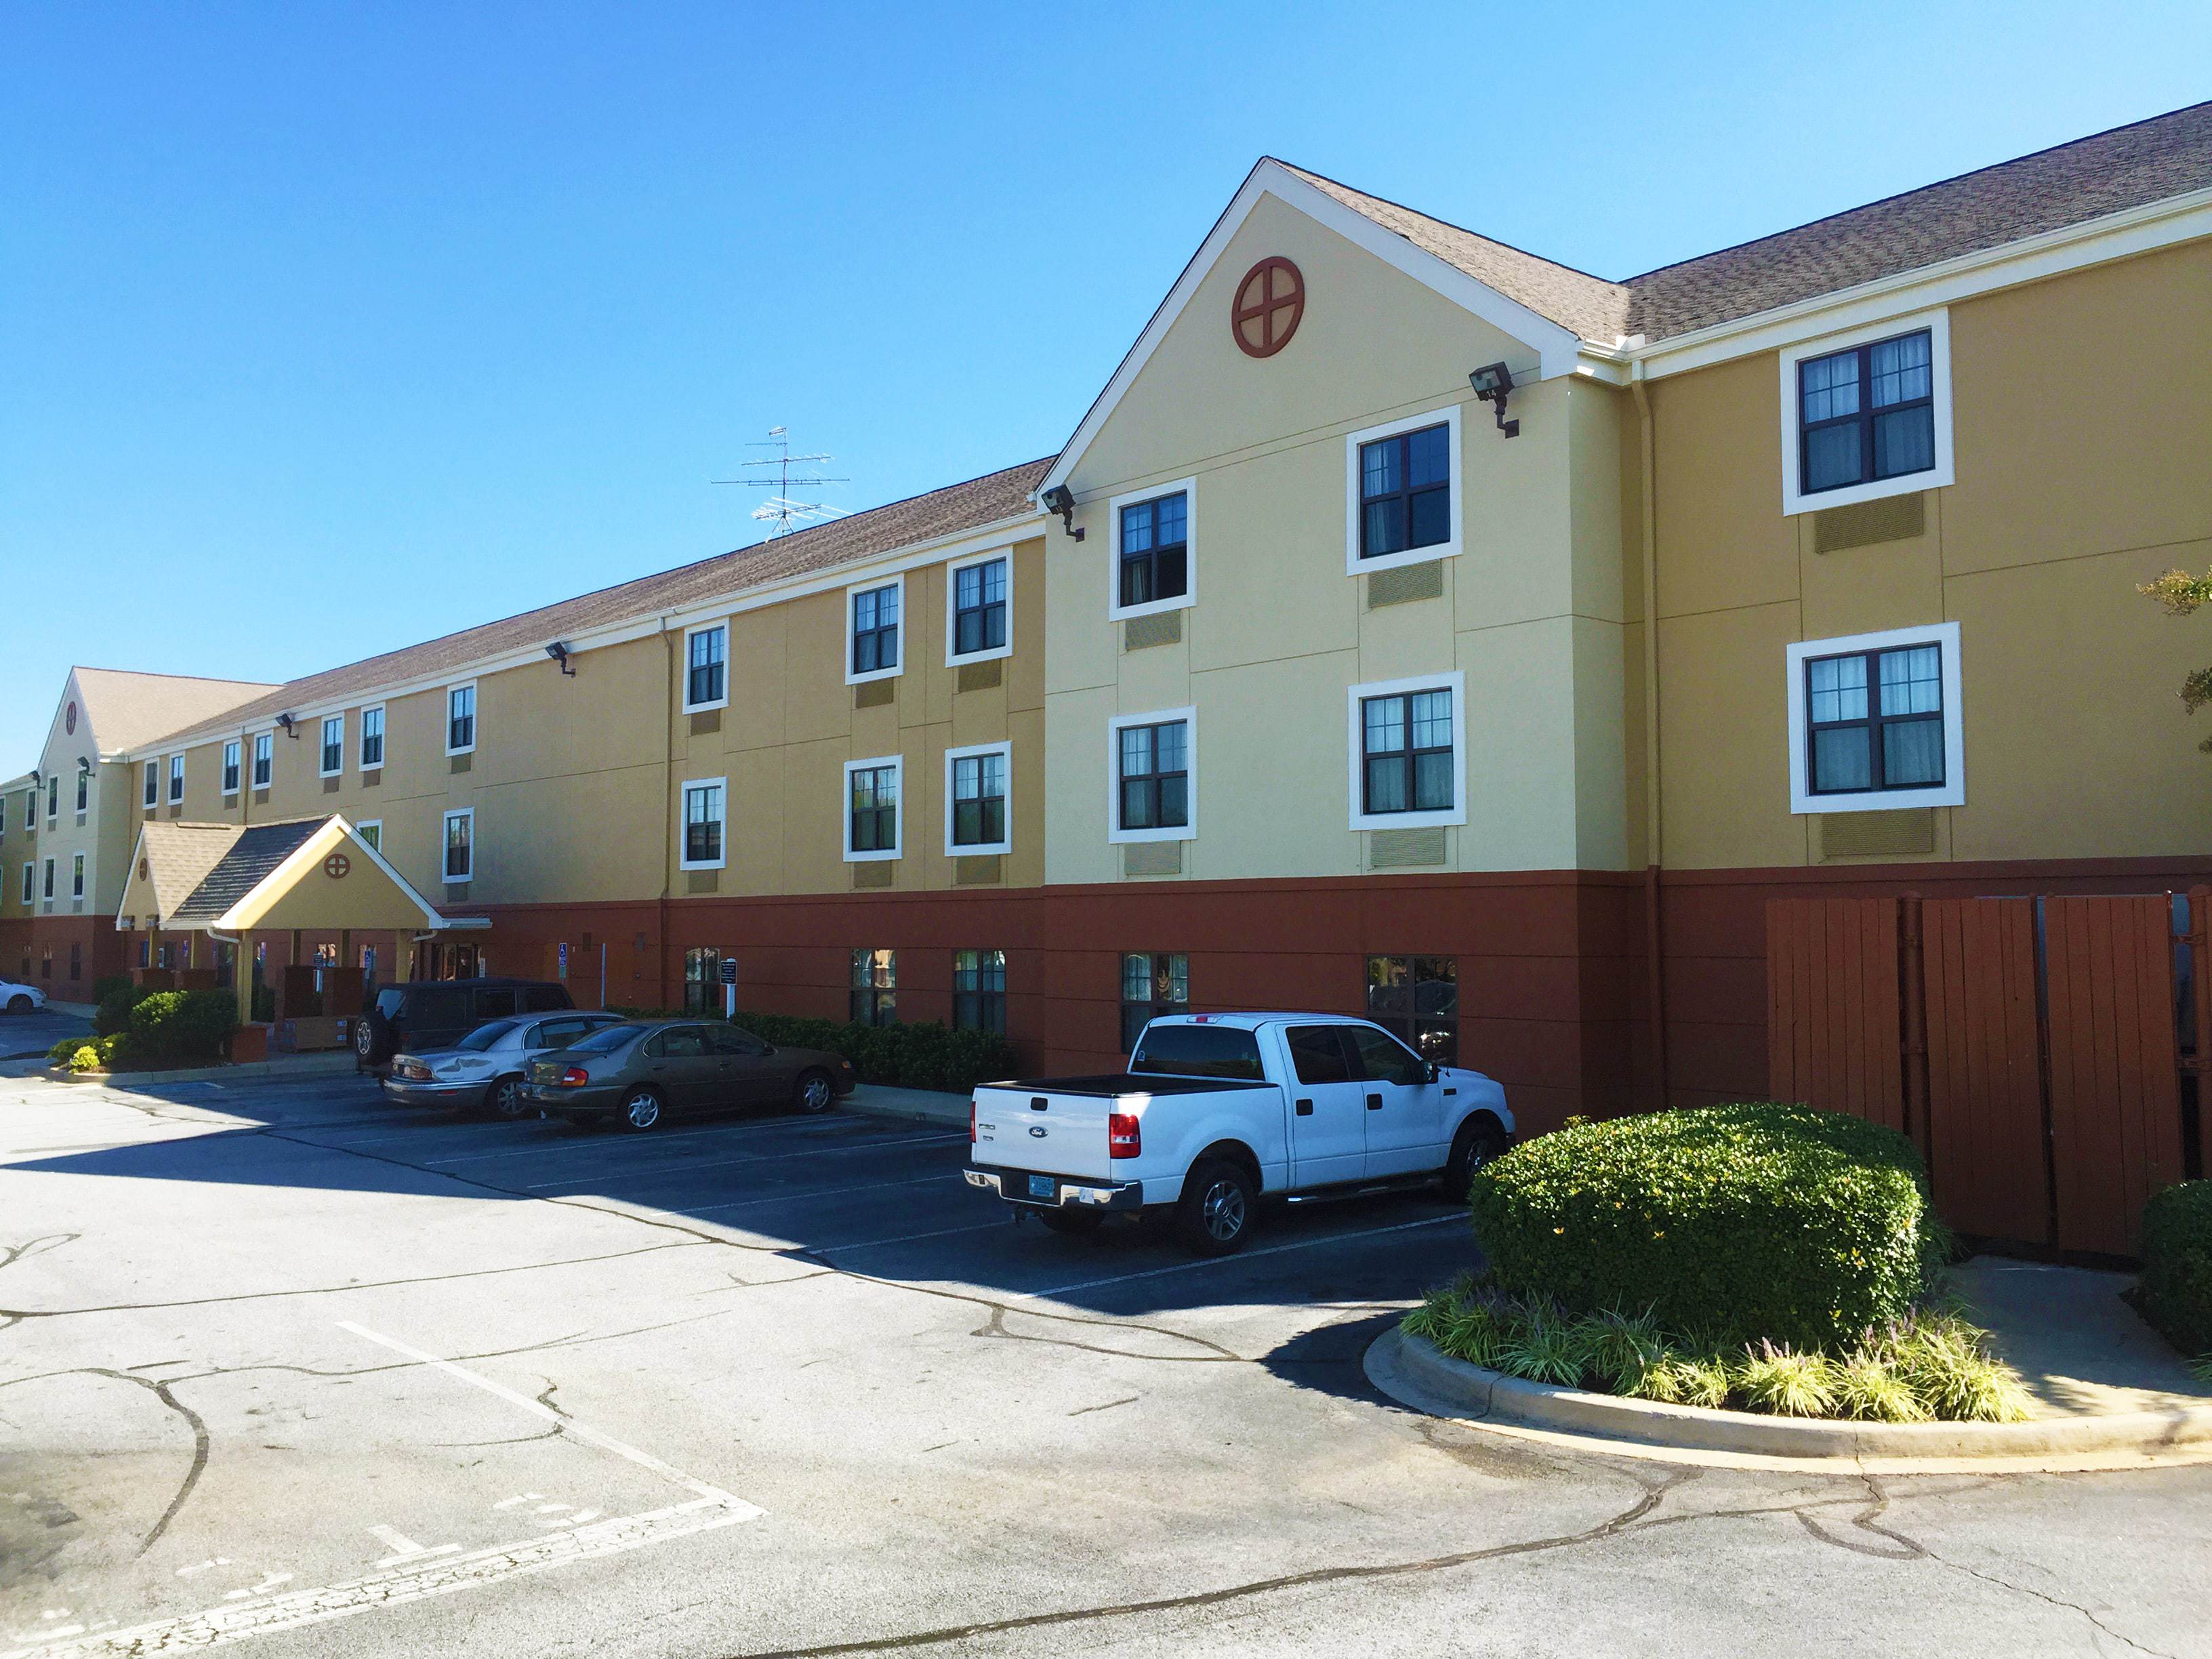 Photo of Extended Stay America - Greenville - Airport, Greenville, SC